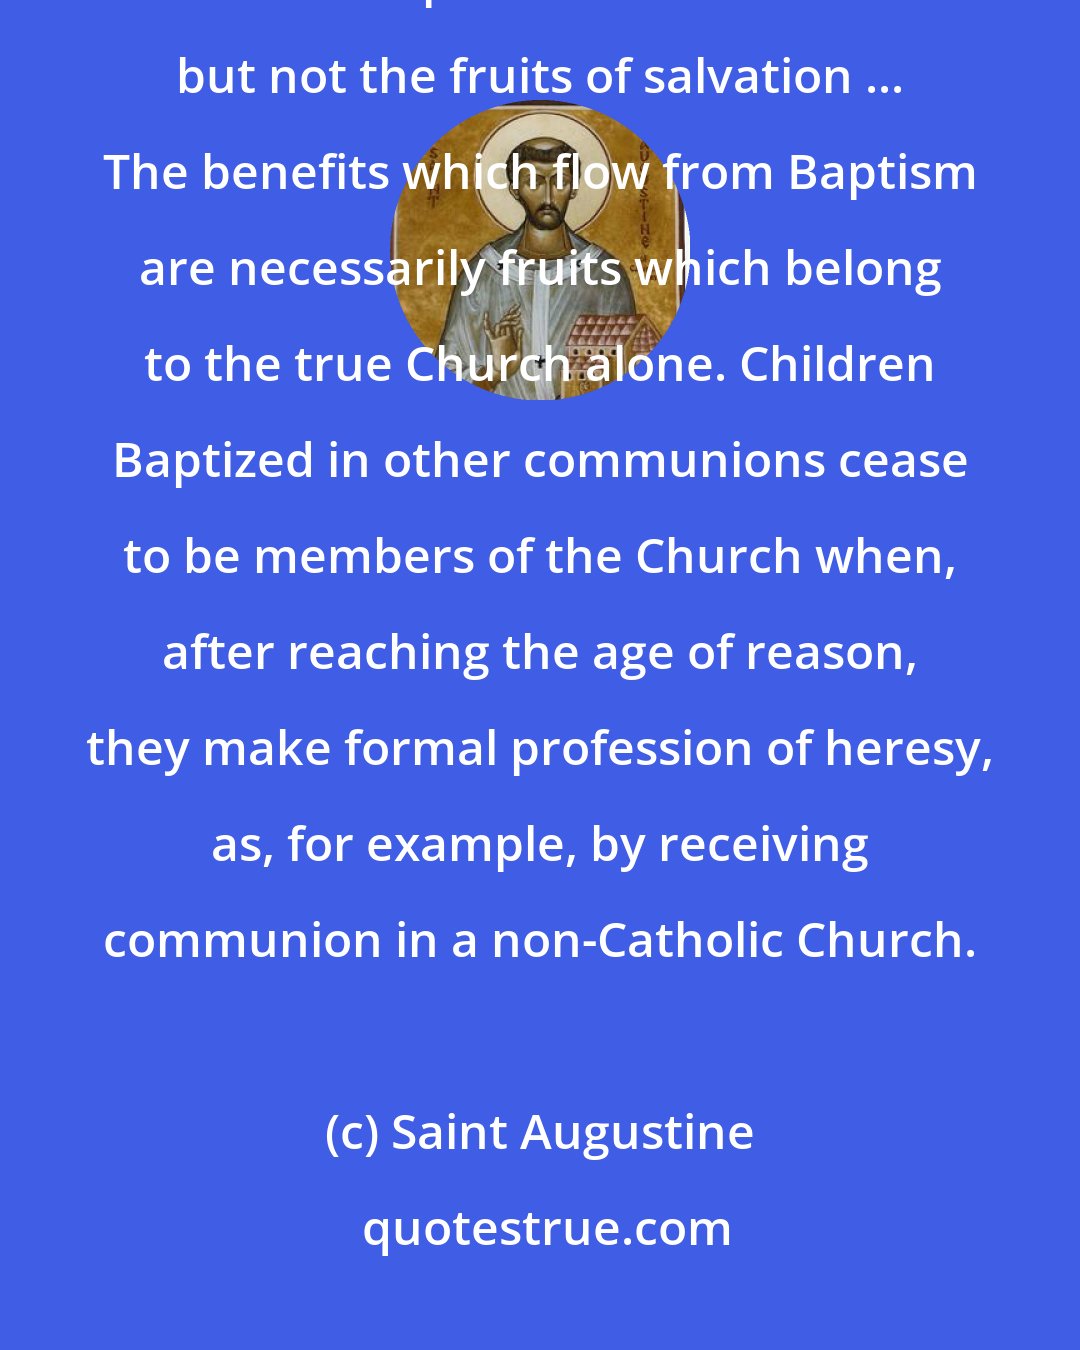 Saint Augustine: Baptism does not profit a man outside unity with the Church ... For many heretics also possess this Sacrament but not the fruits of salvation ... The benefits which flow from Baptism are necessarily fruits which belong to the true Church alone. Children Baptized in other communions cease to be members of the Church when, after reaching the age of reason, they make formal profession of heresy, as, for example, by receiving communion in a non-Catholic Church.